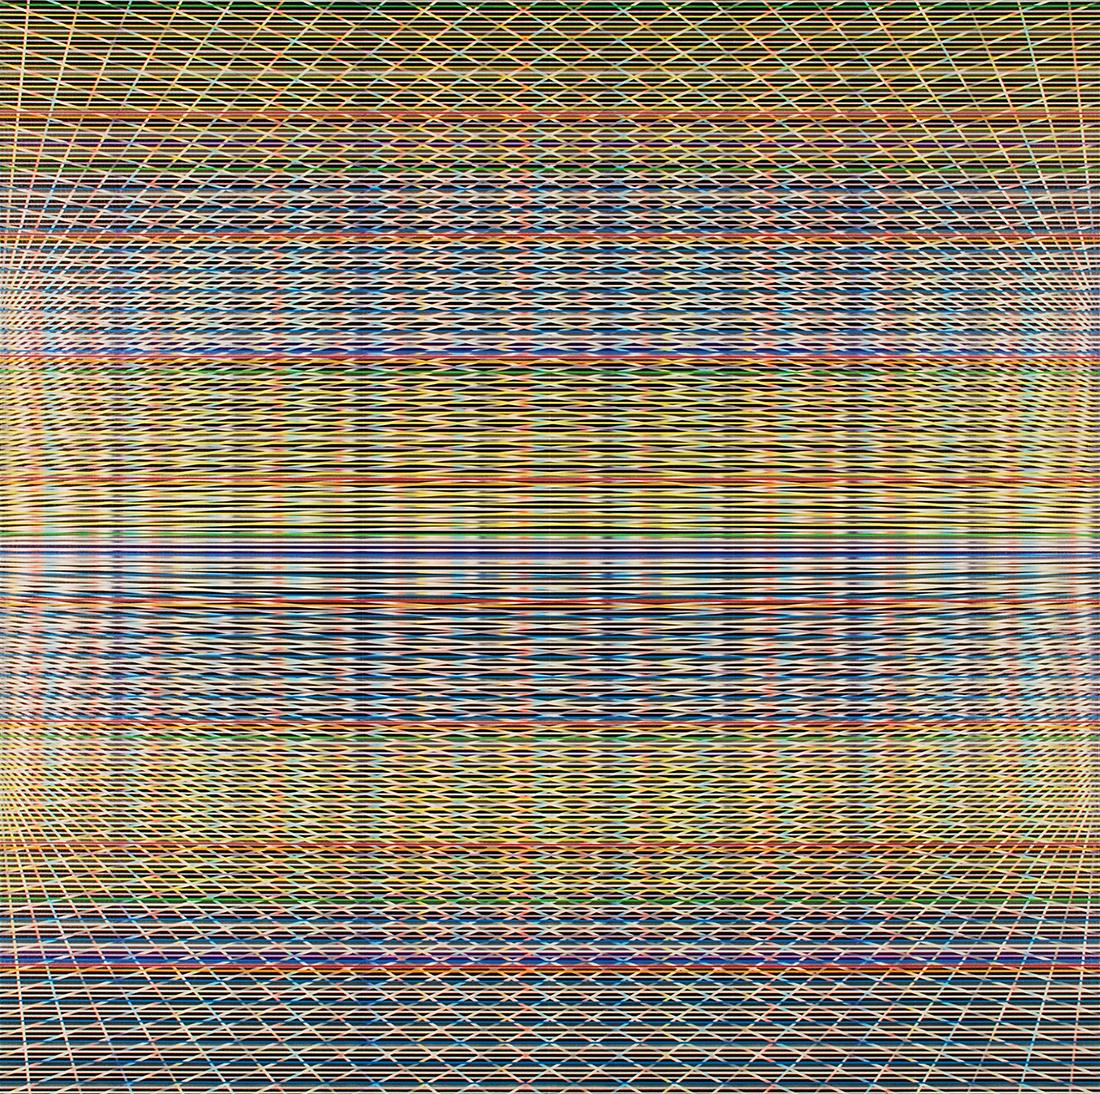 The works by Rob de Oude are composed of meticulously placed repeated lines, with the overlapping lines revealing geometric shapes and patterns. Repeatedly using a single unit, like a straight line, displays the infinite possibilities of a